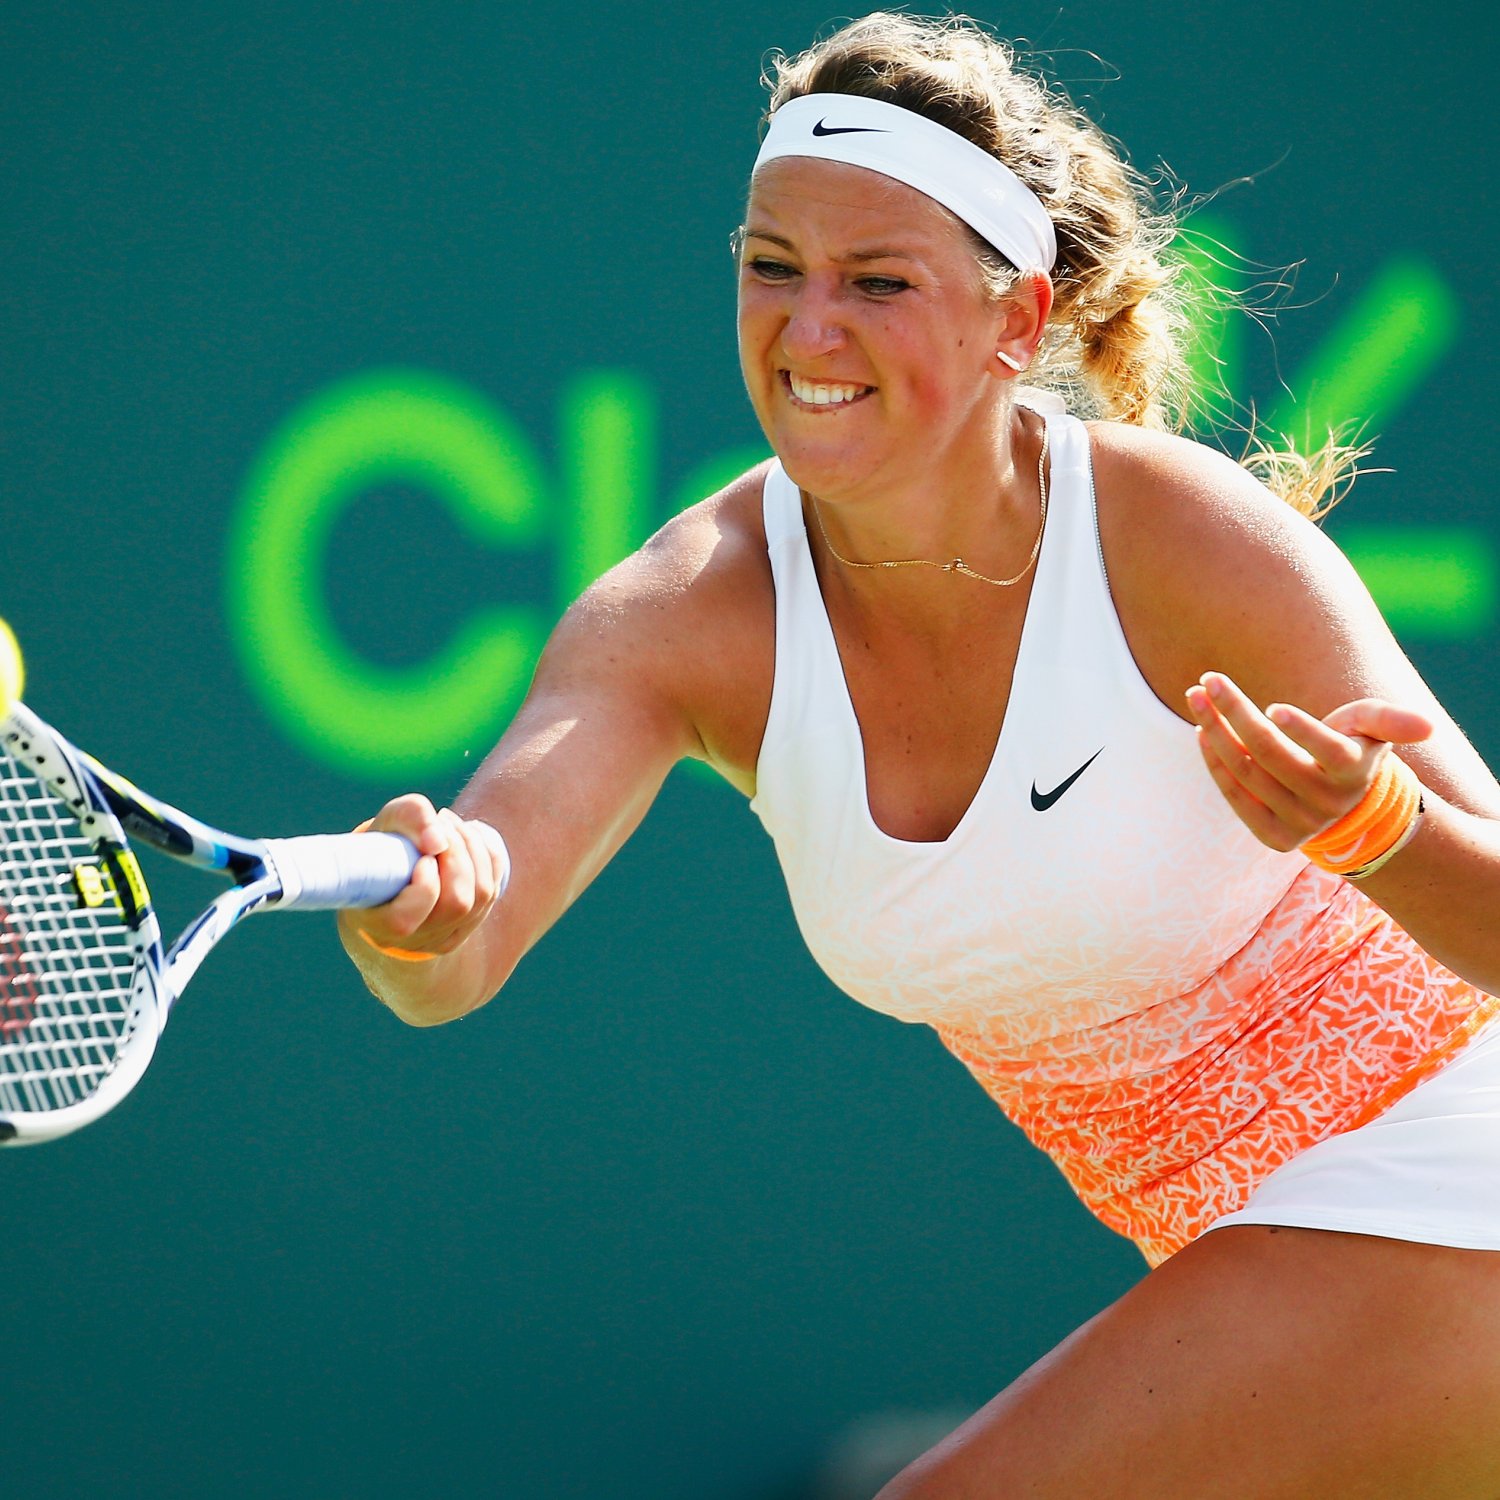 Miami Open Tennis 2015 Results: Scores, Bracket and Schedule After Friday | Bleacher ...